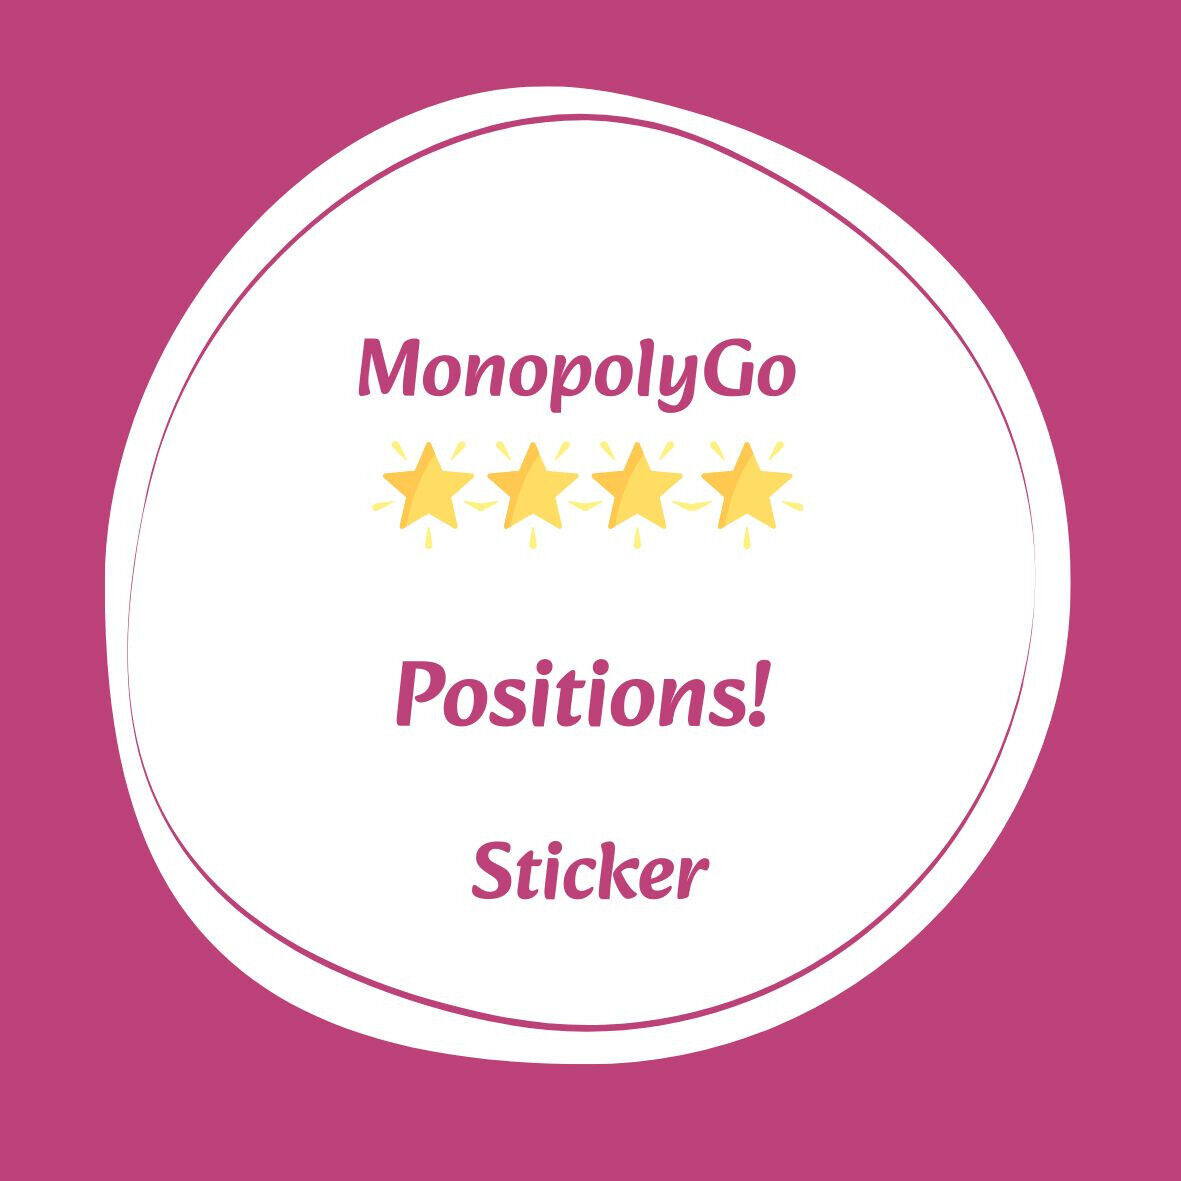 Positions Monopoly GO 4 Star ⭐️⭐️⭐️⭐️ Stickers -⚡️Cheap Fast DELIVERY⚡️